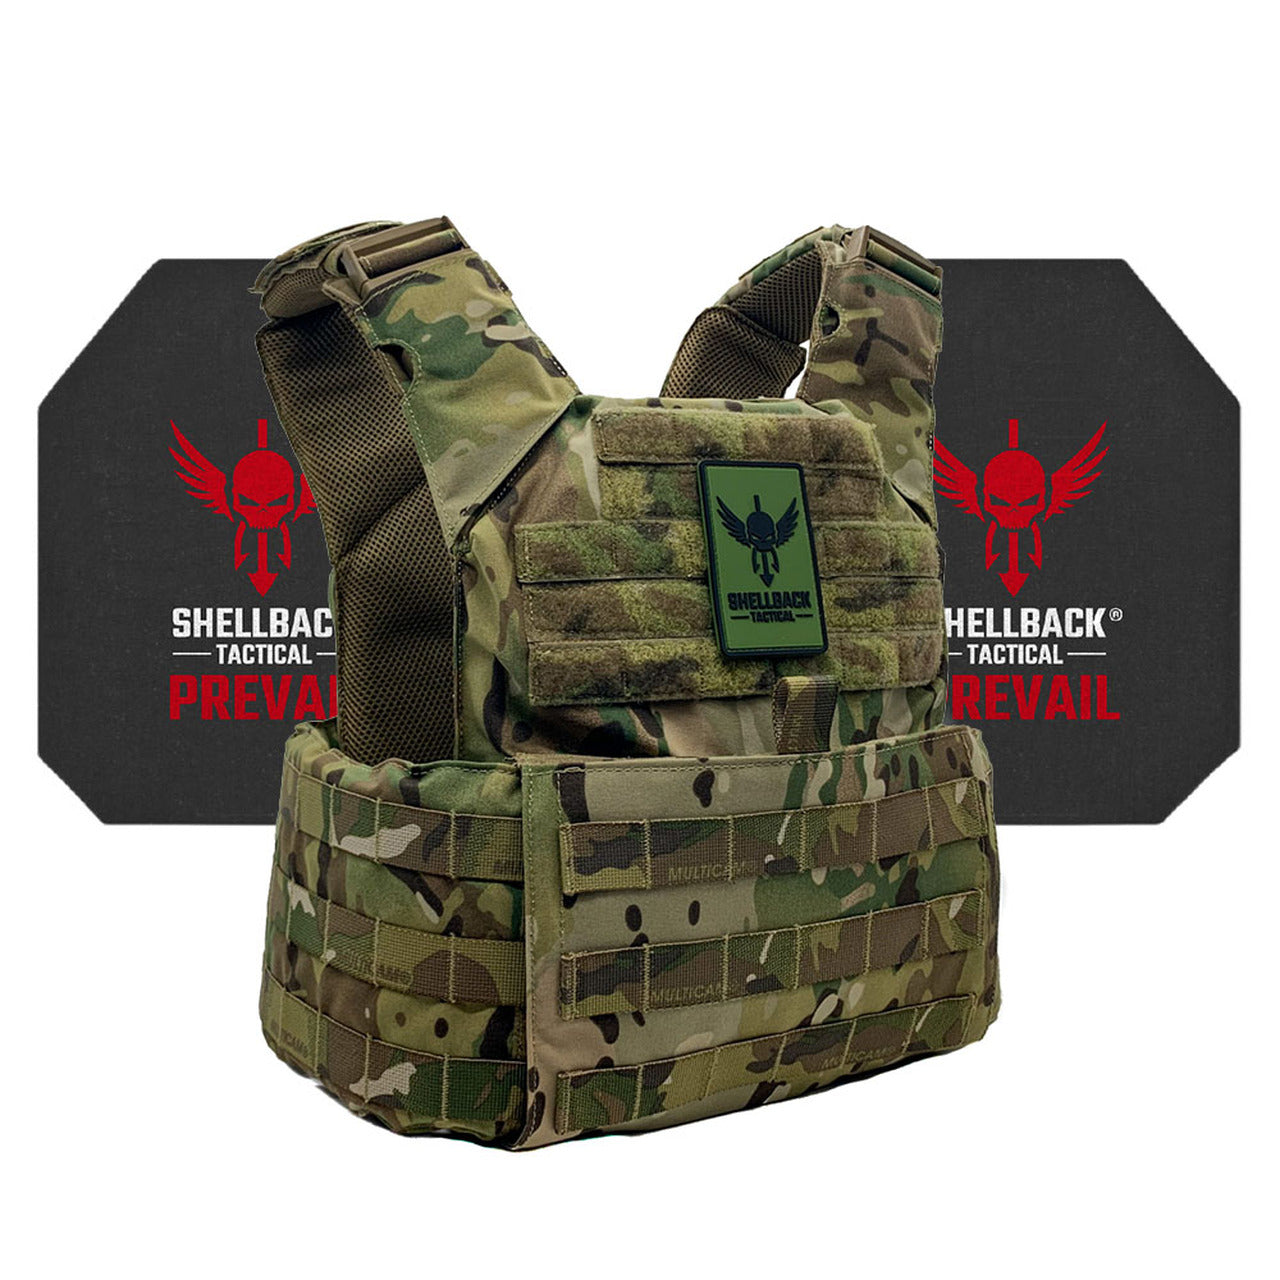 A Shellback Tactical Skirmish Active Shooter Kit with Level IV 4S17 Plates plate carrier with the Shellback Tactical logo on it.